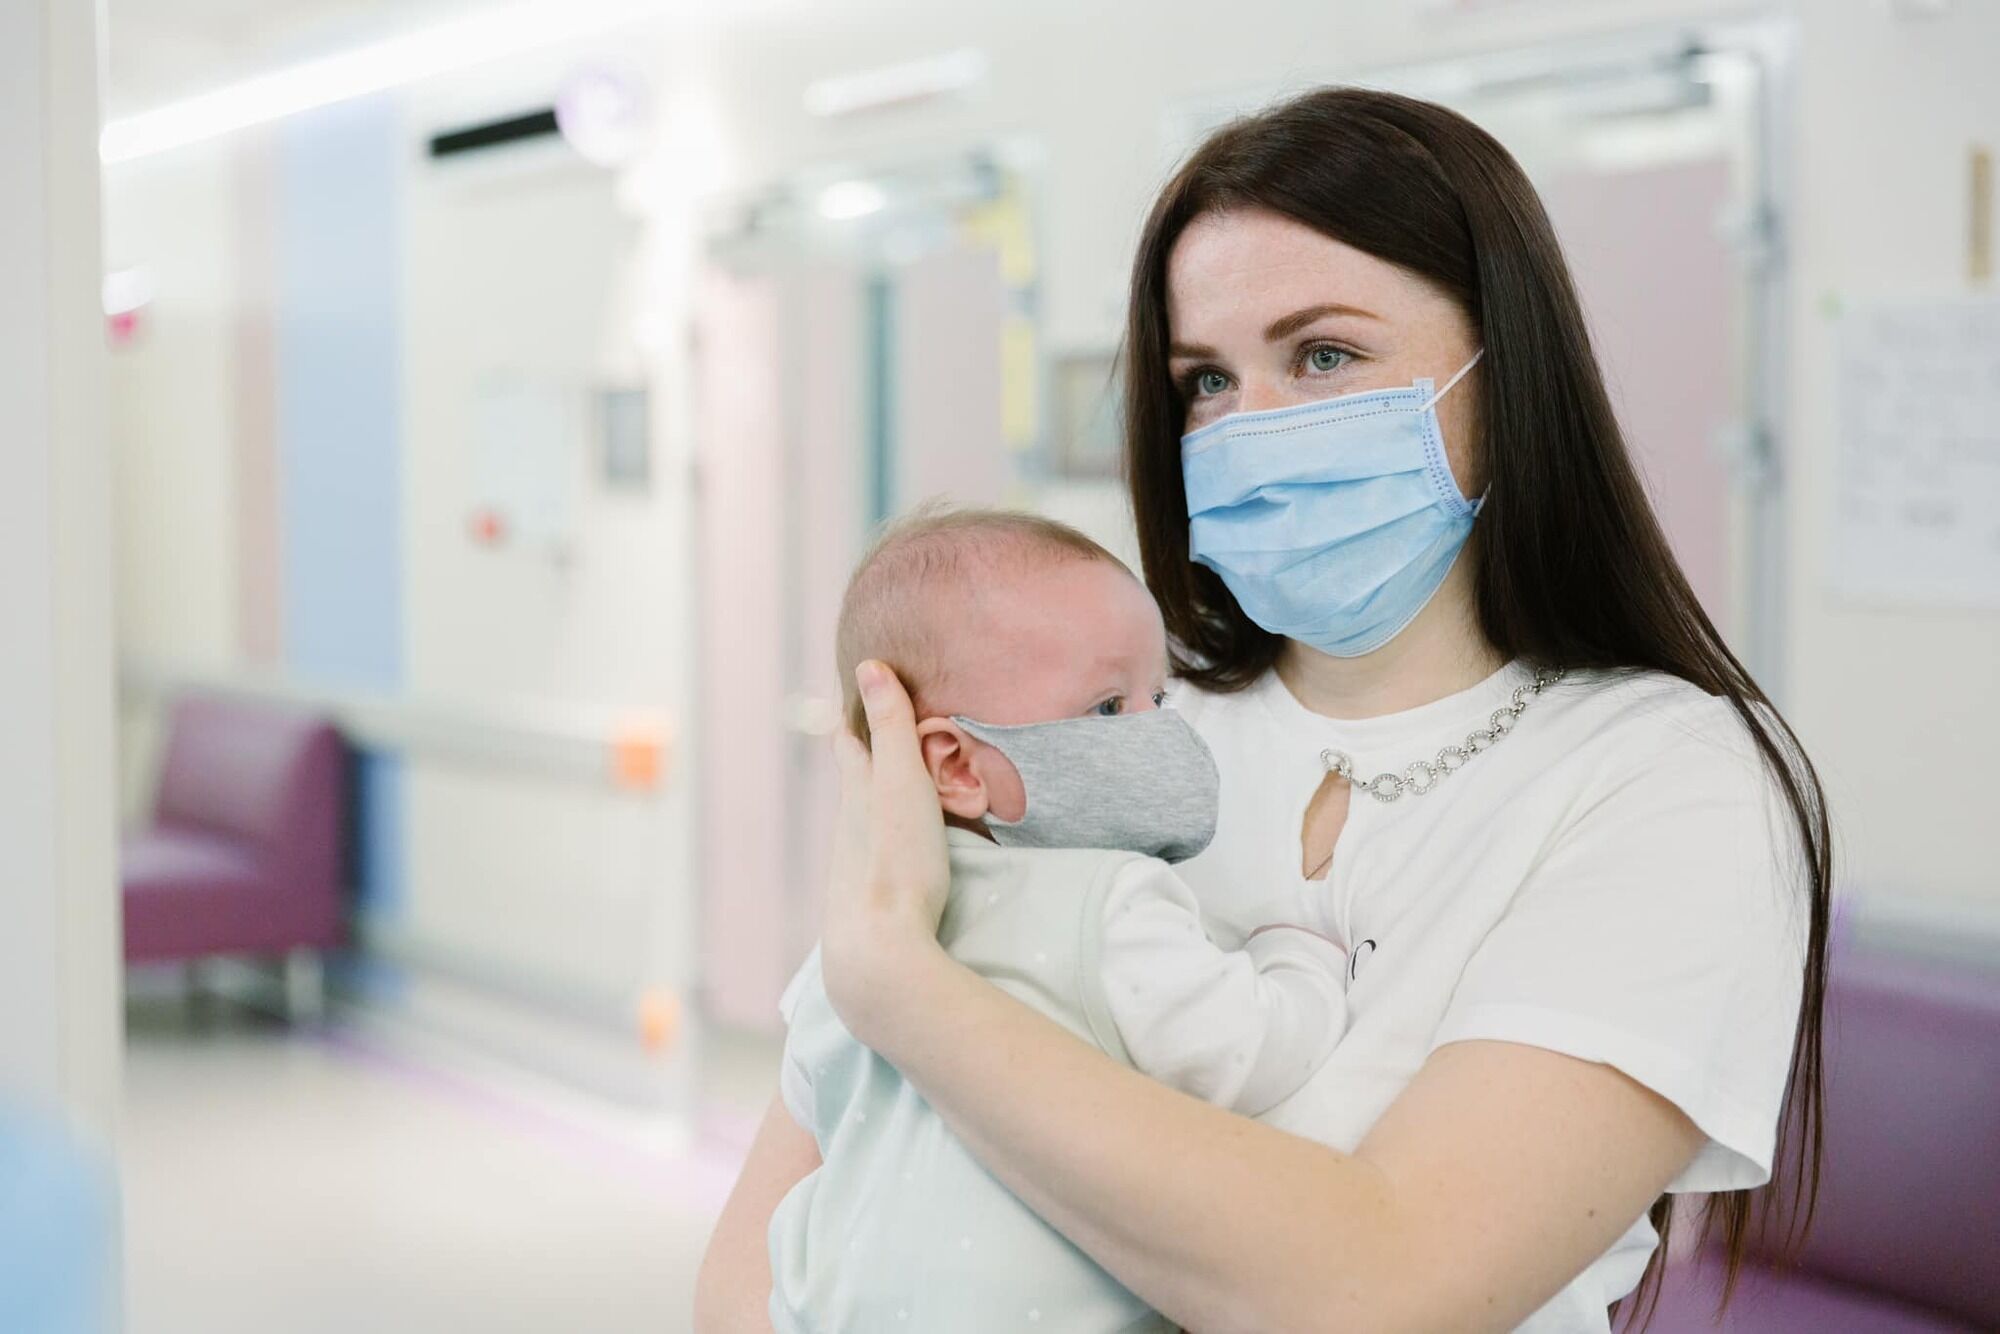 For the first time in Ukraine, a bone marrow transplant was performed on a 2-month-old child. Photo